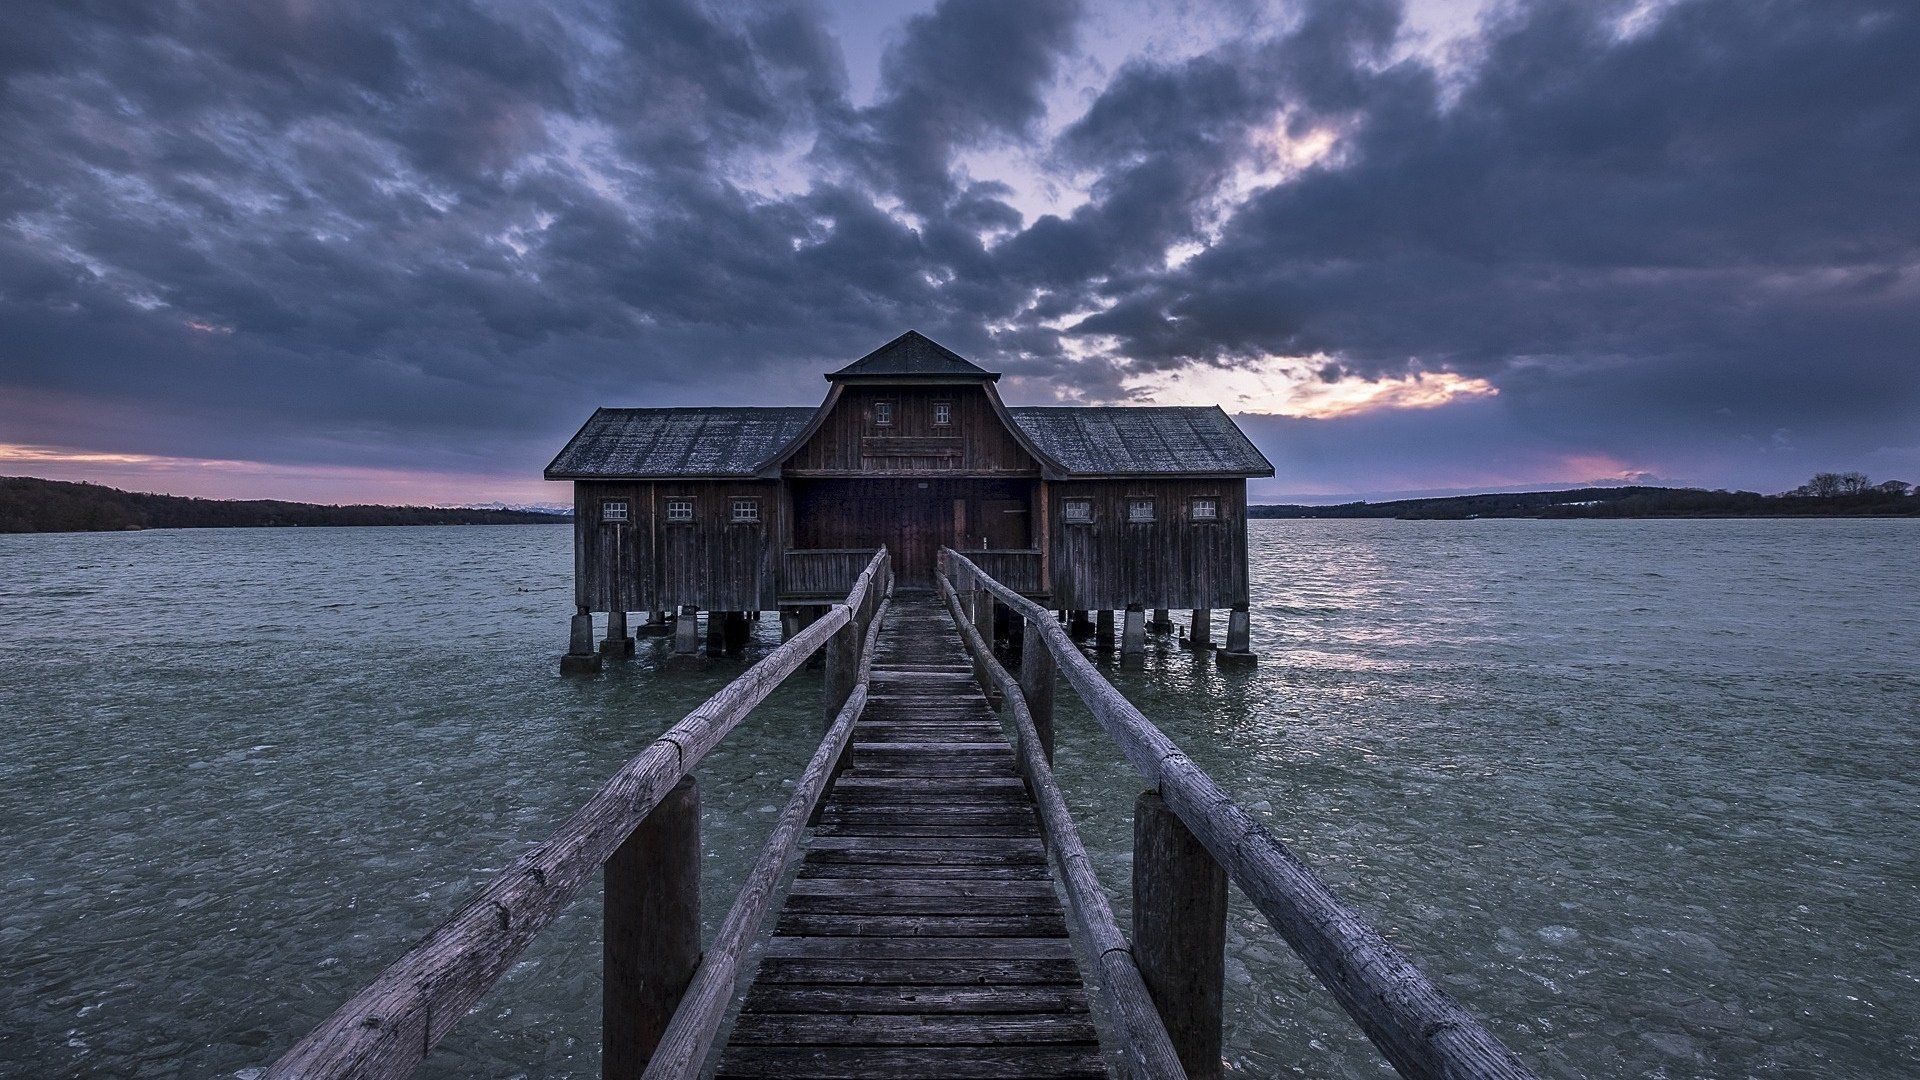 Dark Clouds over Boathouse Pier HD Wallpaper. Background Image